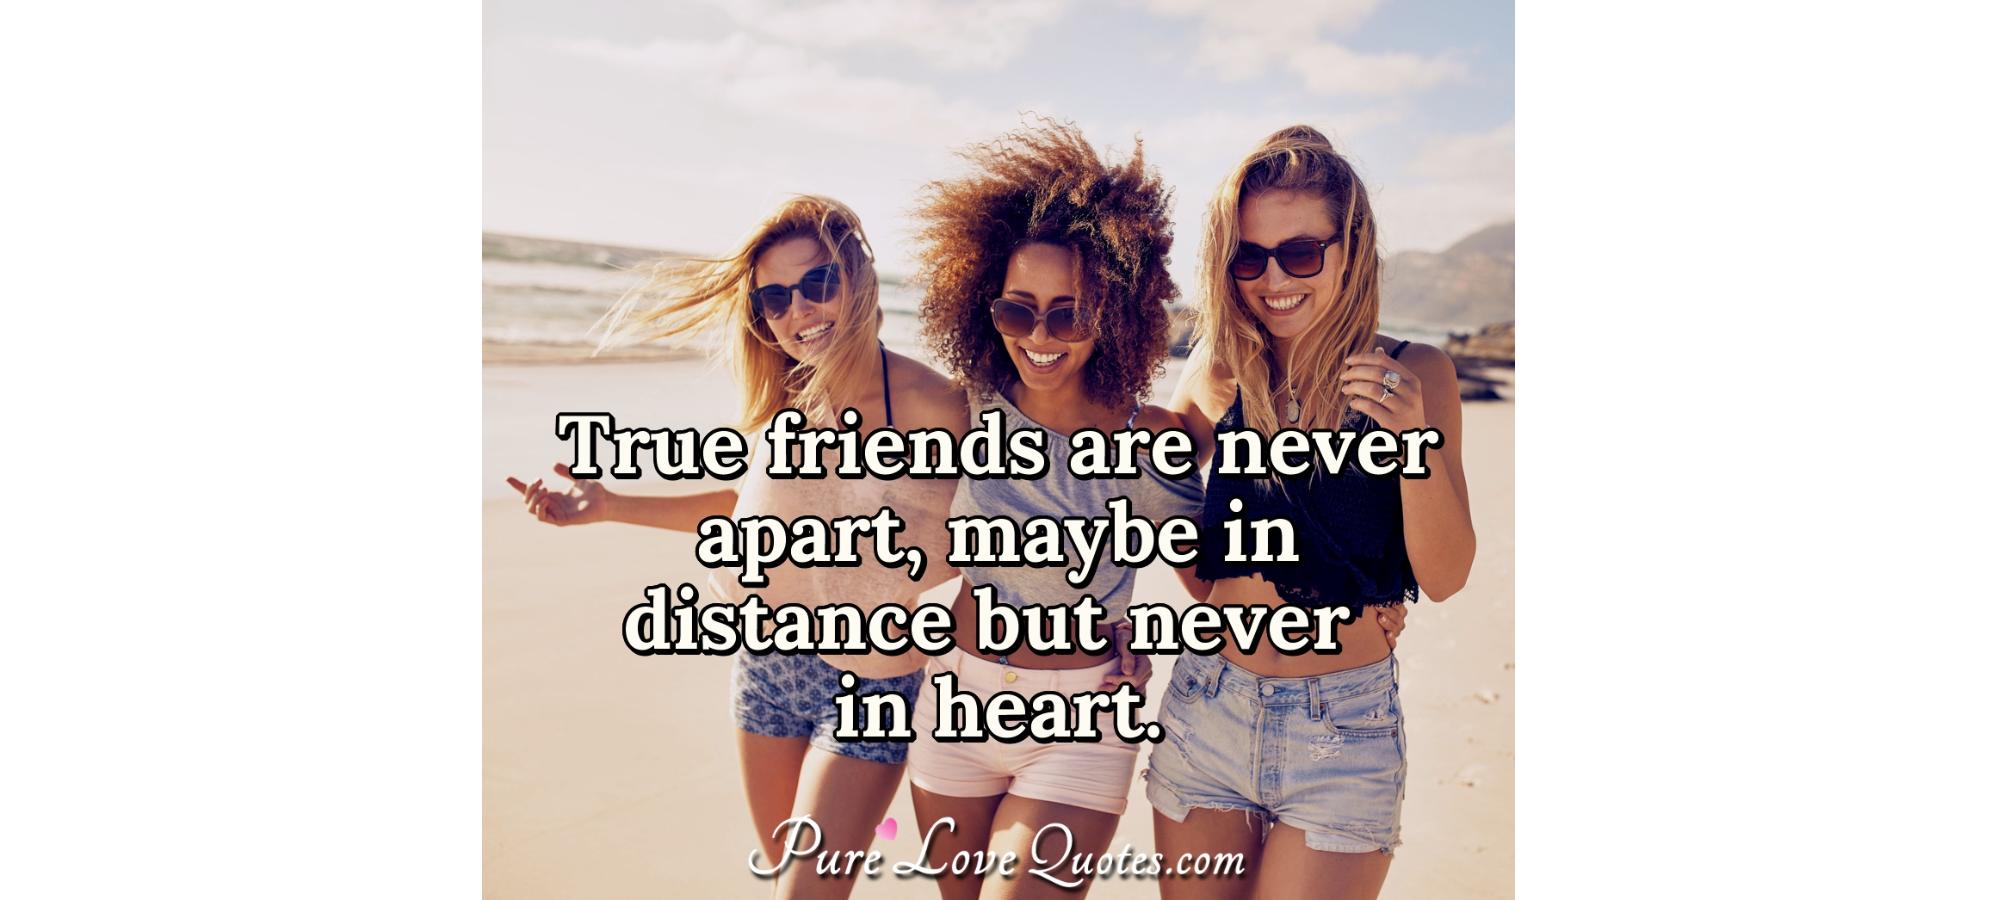 True friends are never apart, maybe in distance but never 